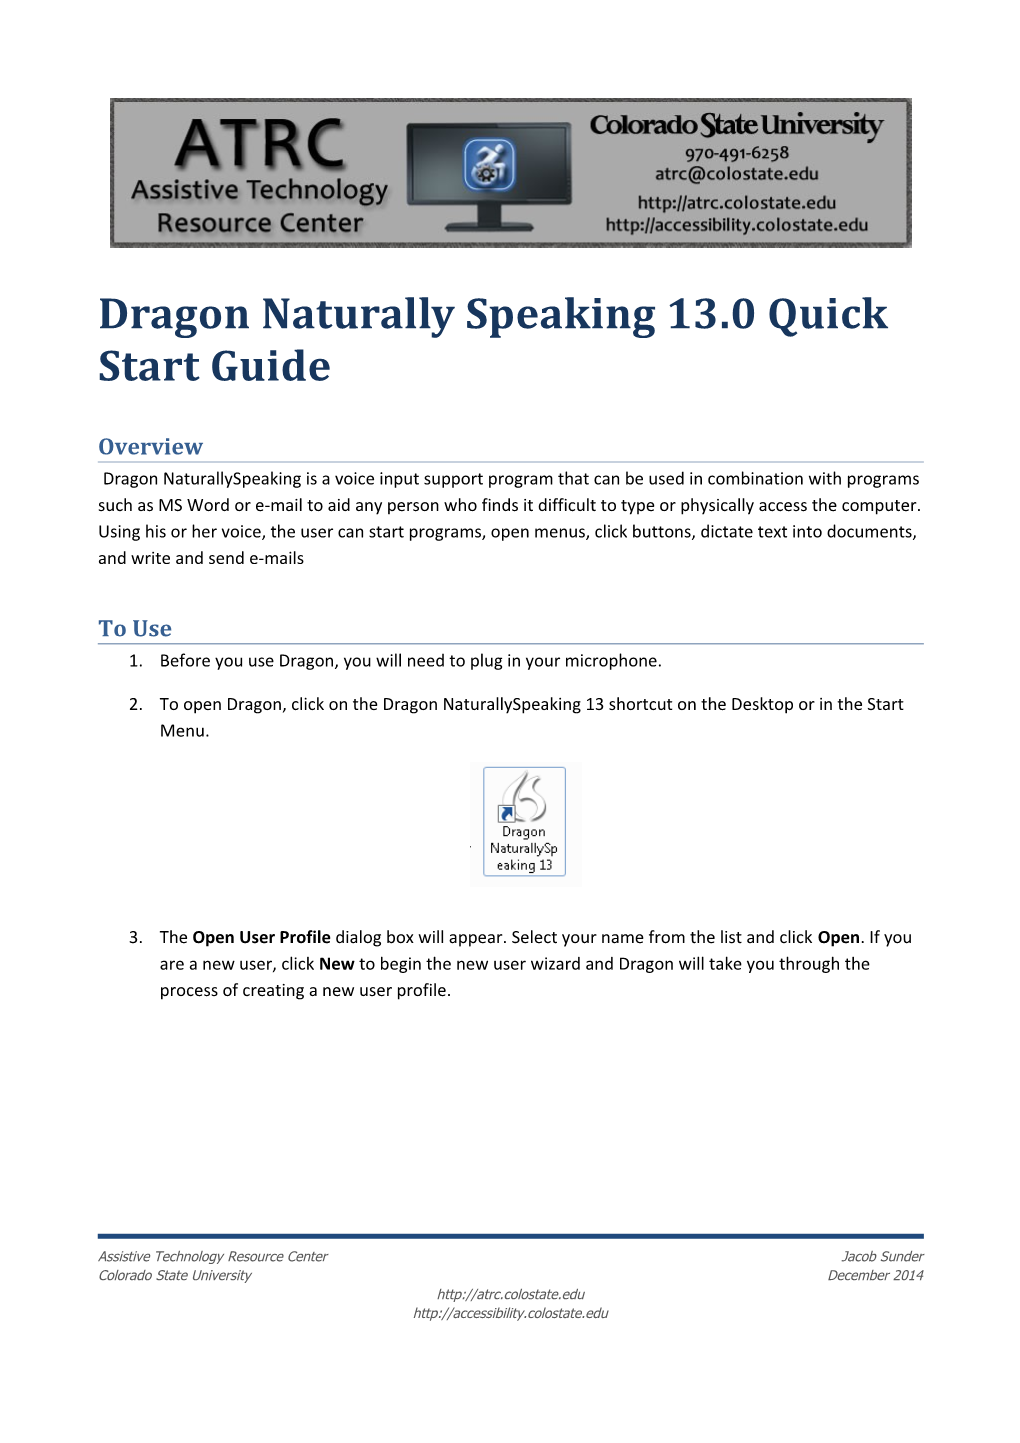 Dragon Naturally Speaking 13.0 Quick Start Guide